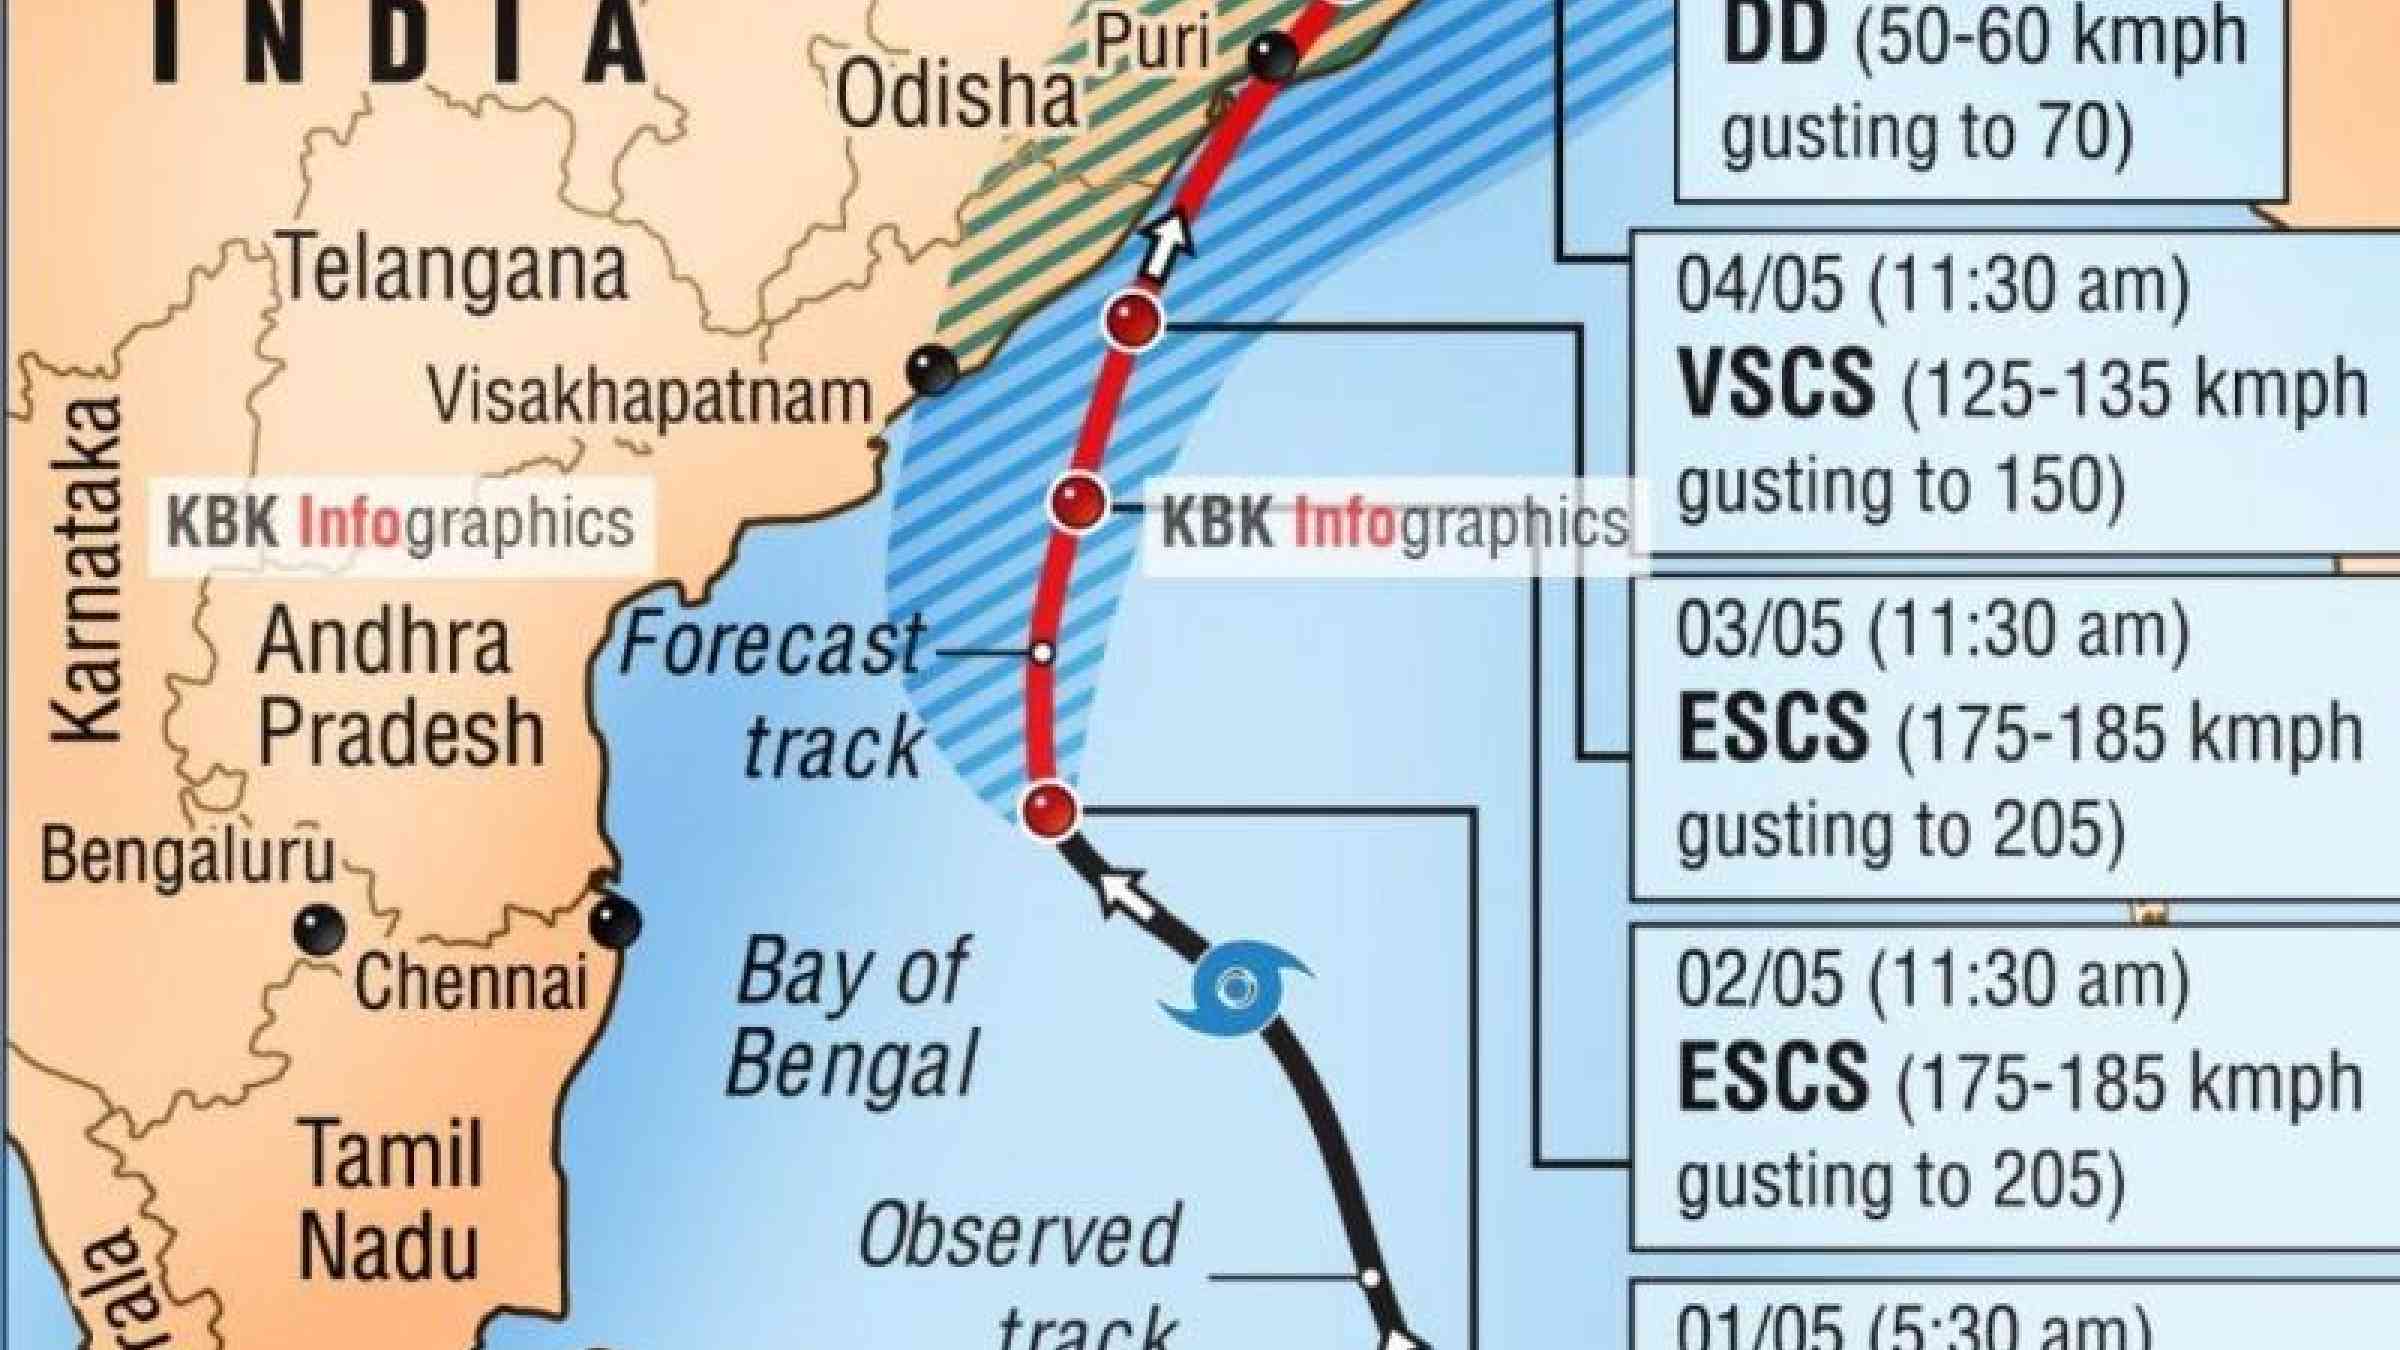 The Indian Meteorology Department started tracking cyclone Foni days before it made landfall